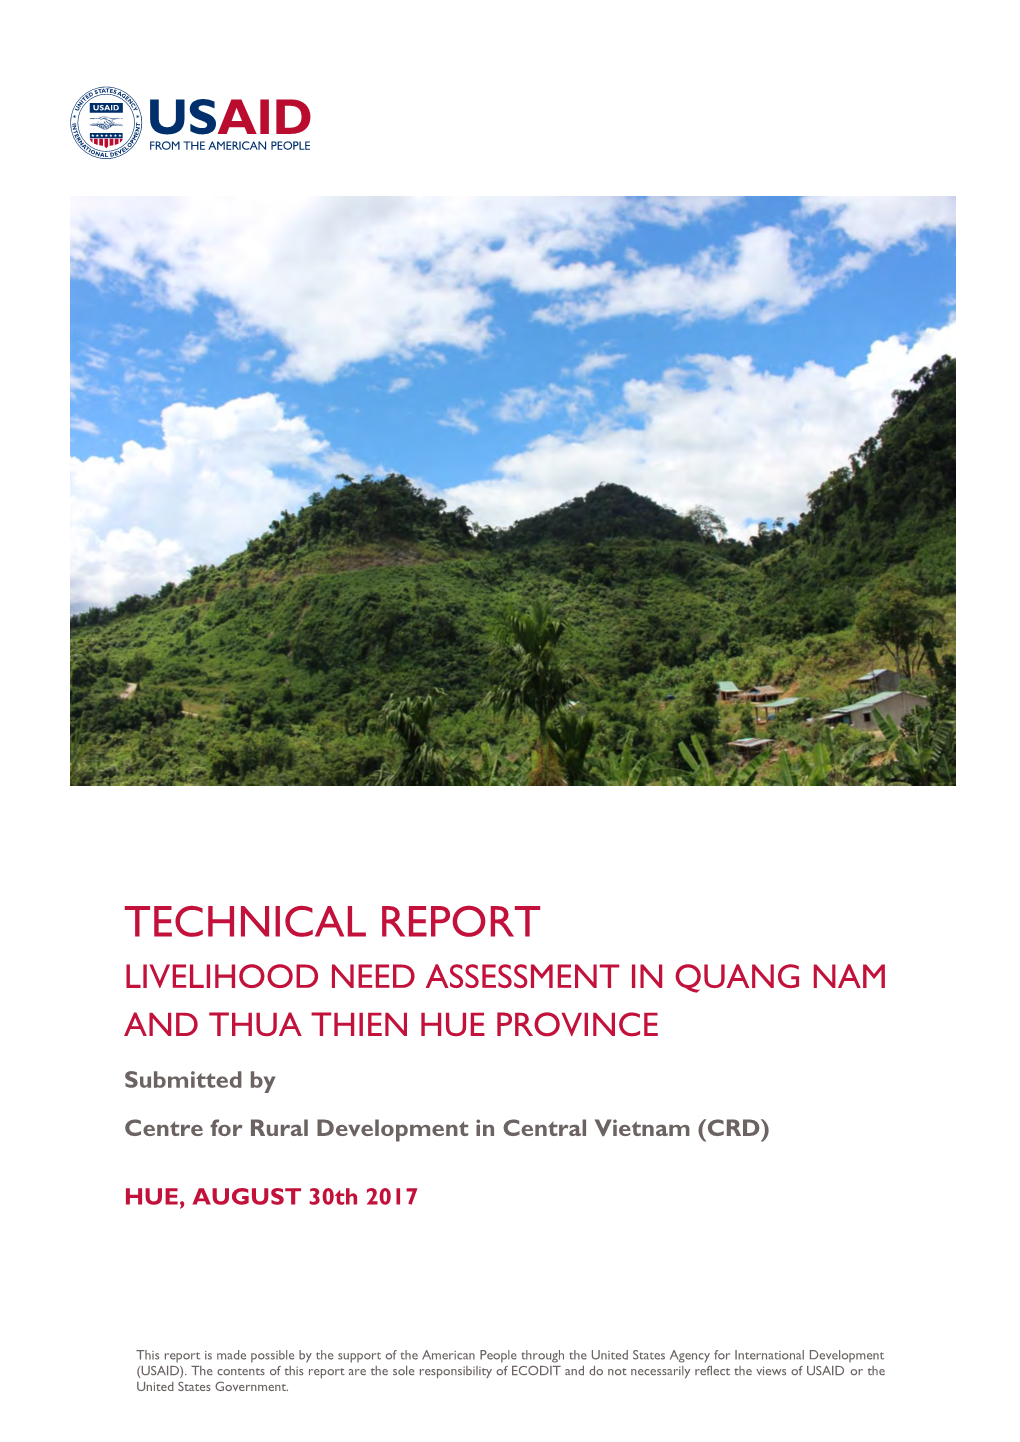 Technical Report Livelihood Need Assessment in Quang Nam and Thua Thien Hue Province